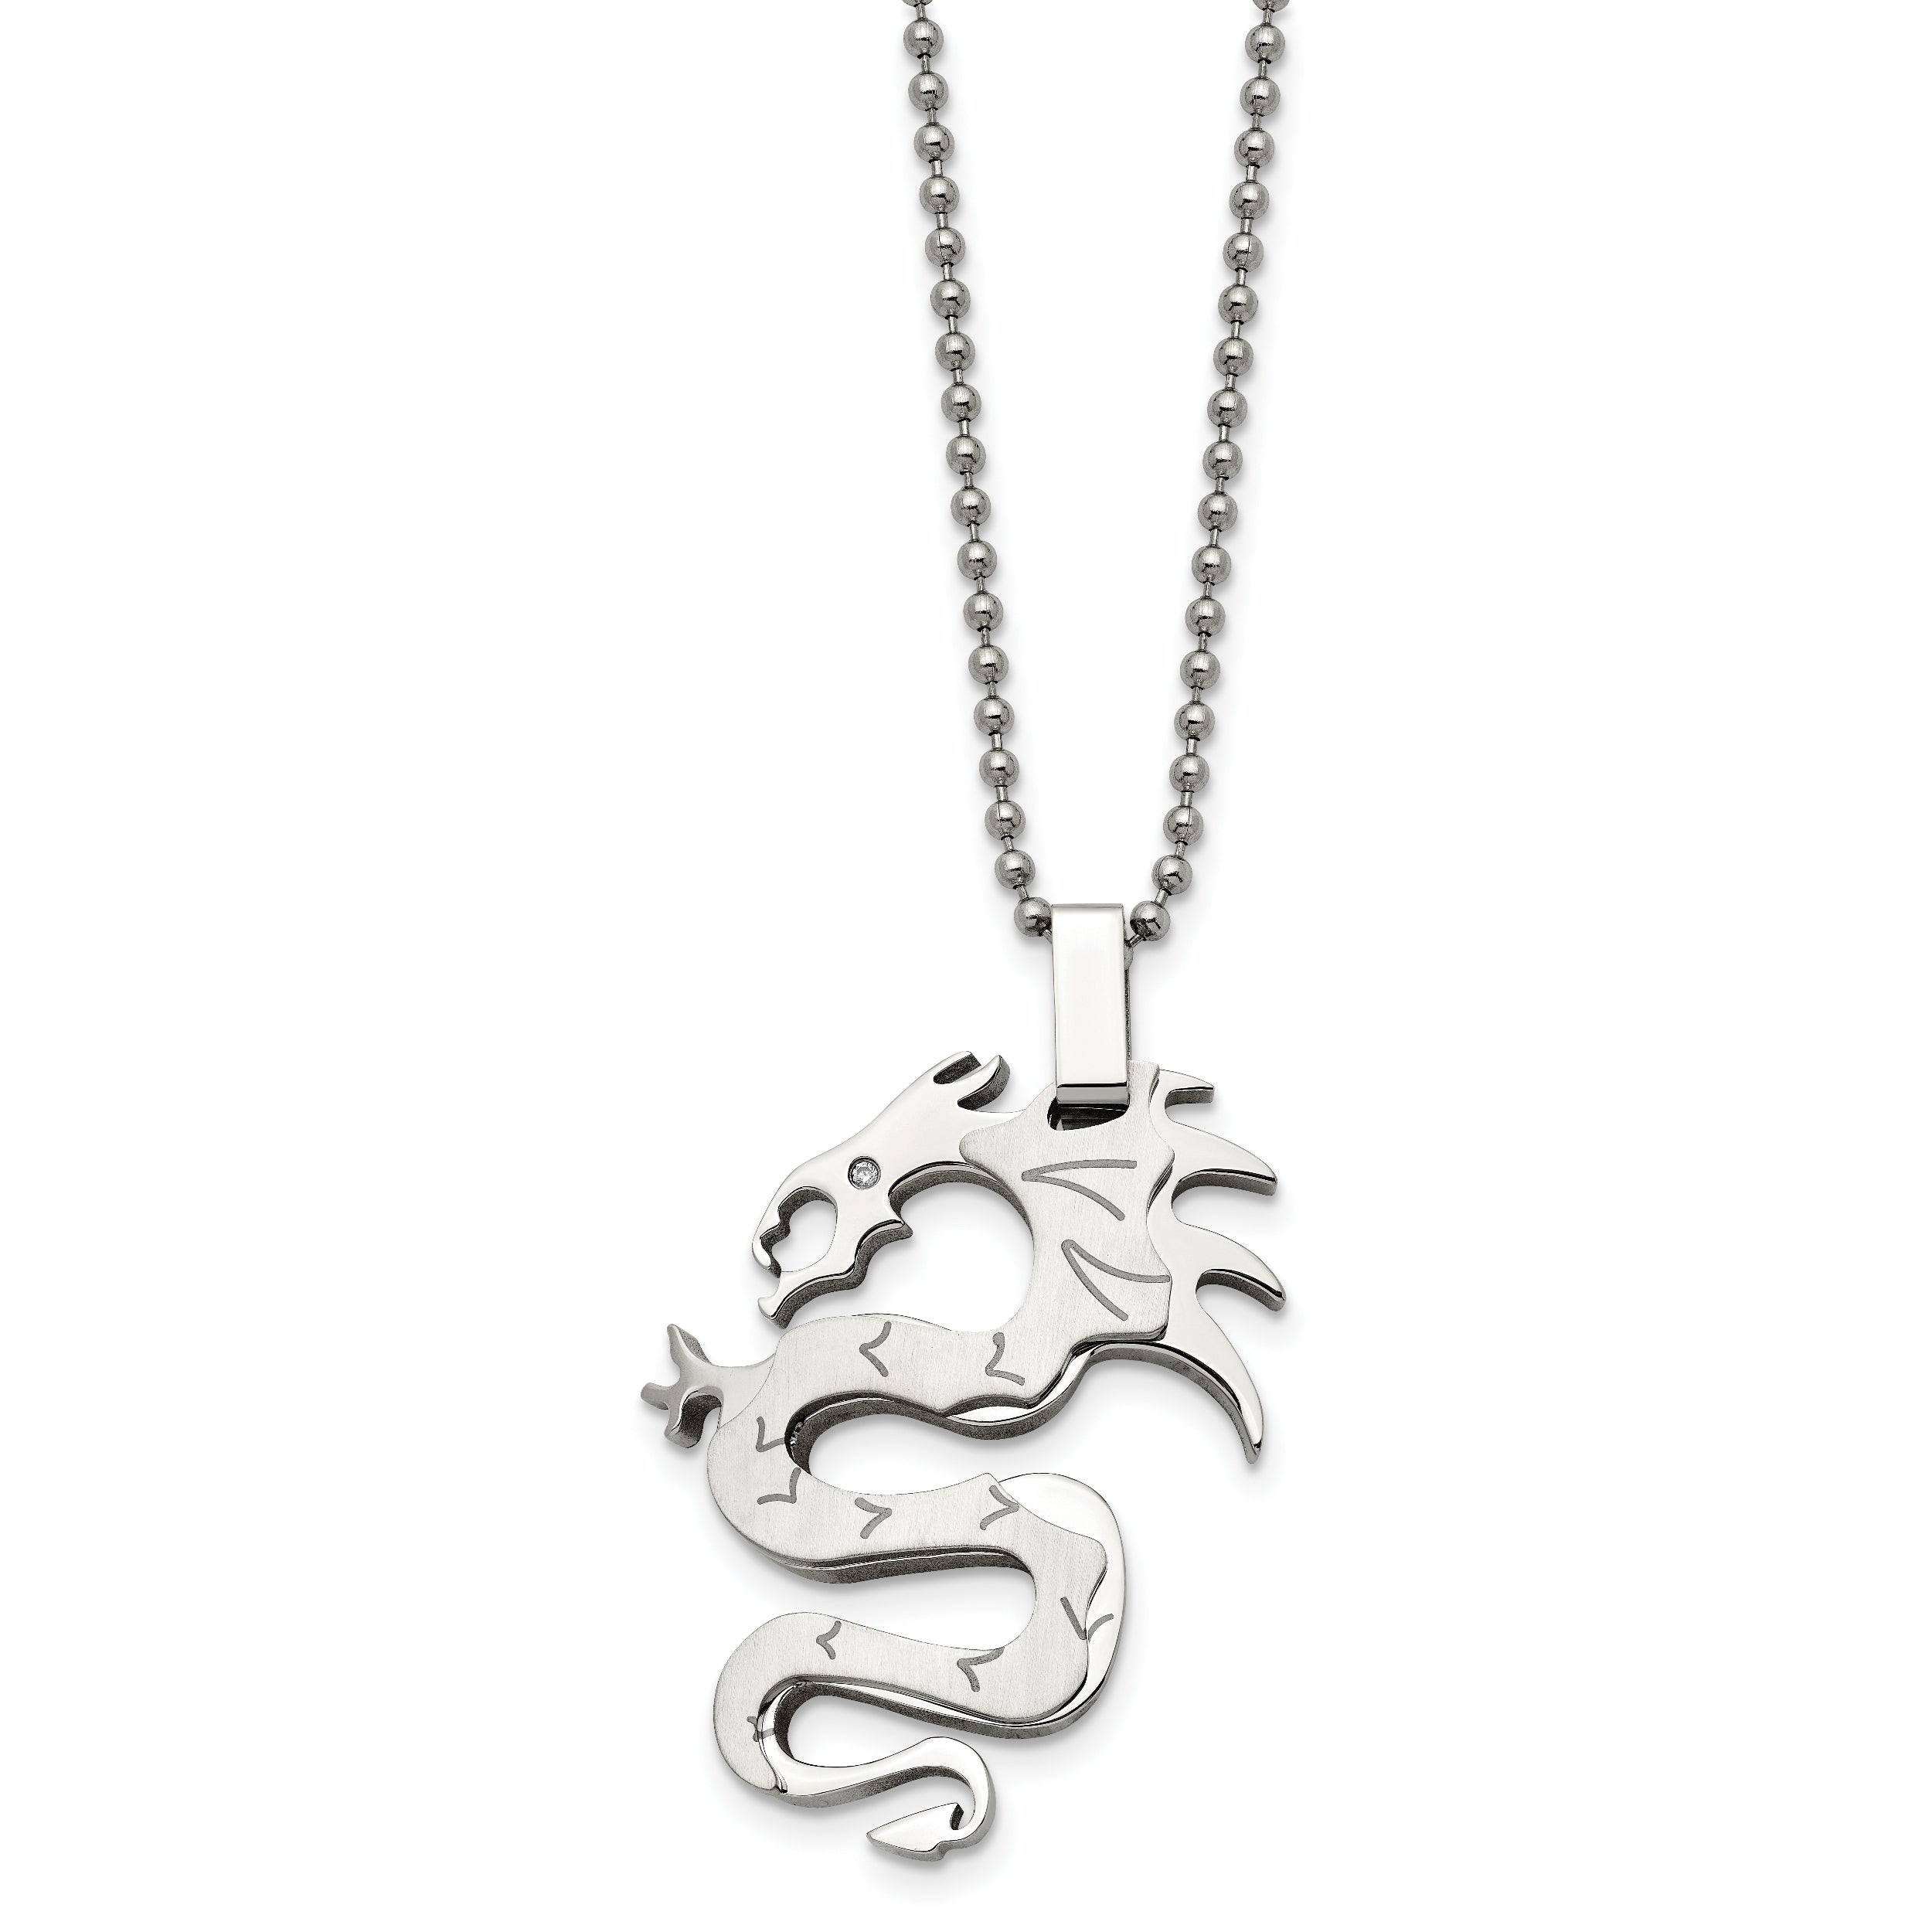 Chisel Stainless Steel Brushed and Polished with CZ Dragon Pendant on a 22 inch Ball Chain Necklace